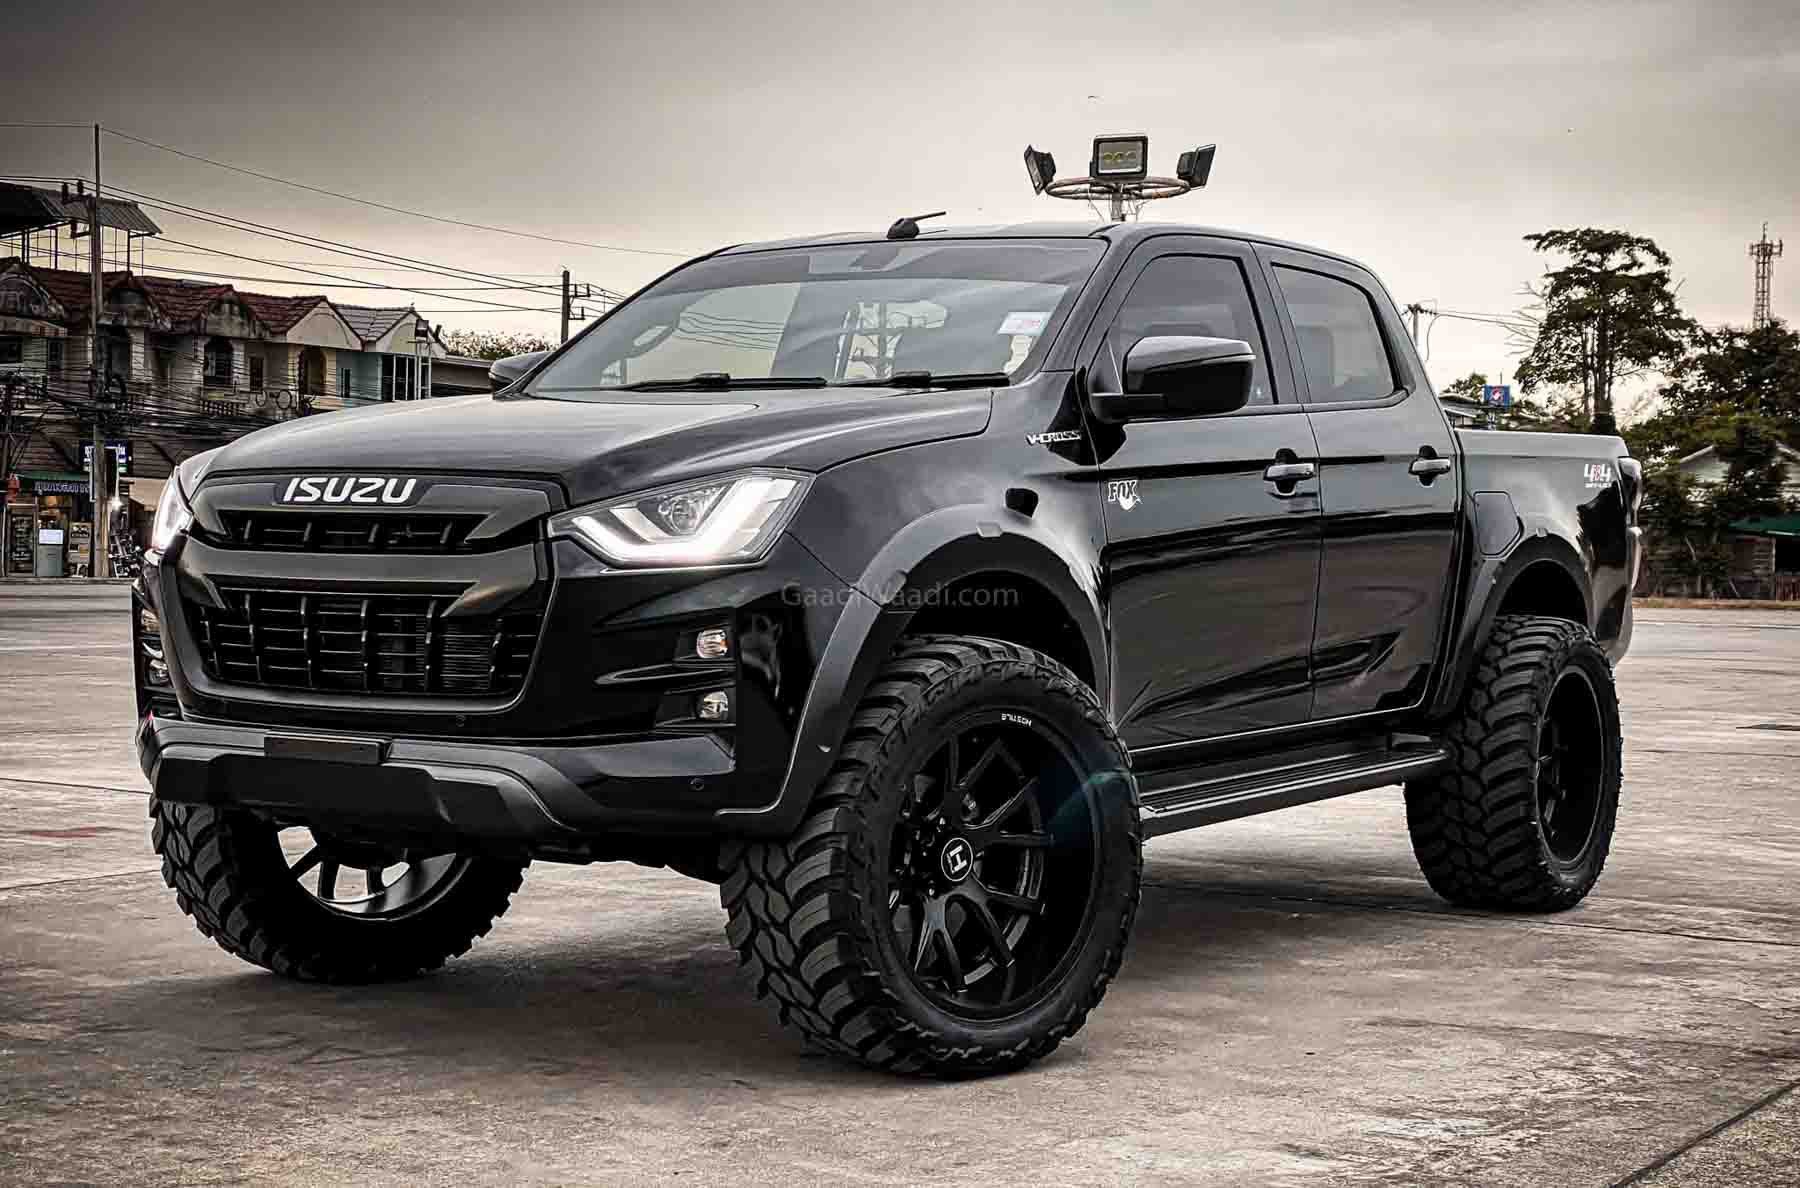 This Modified Isuzu DMax VCross is the Pickup Truck of Your Dreams!